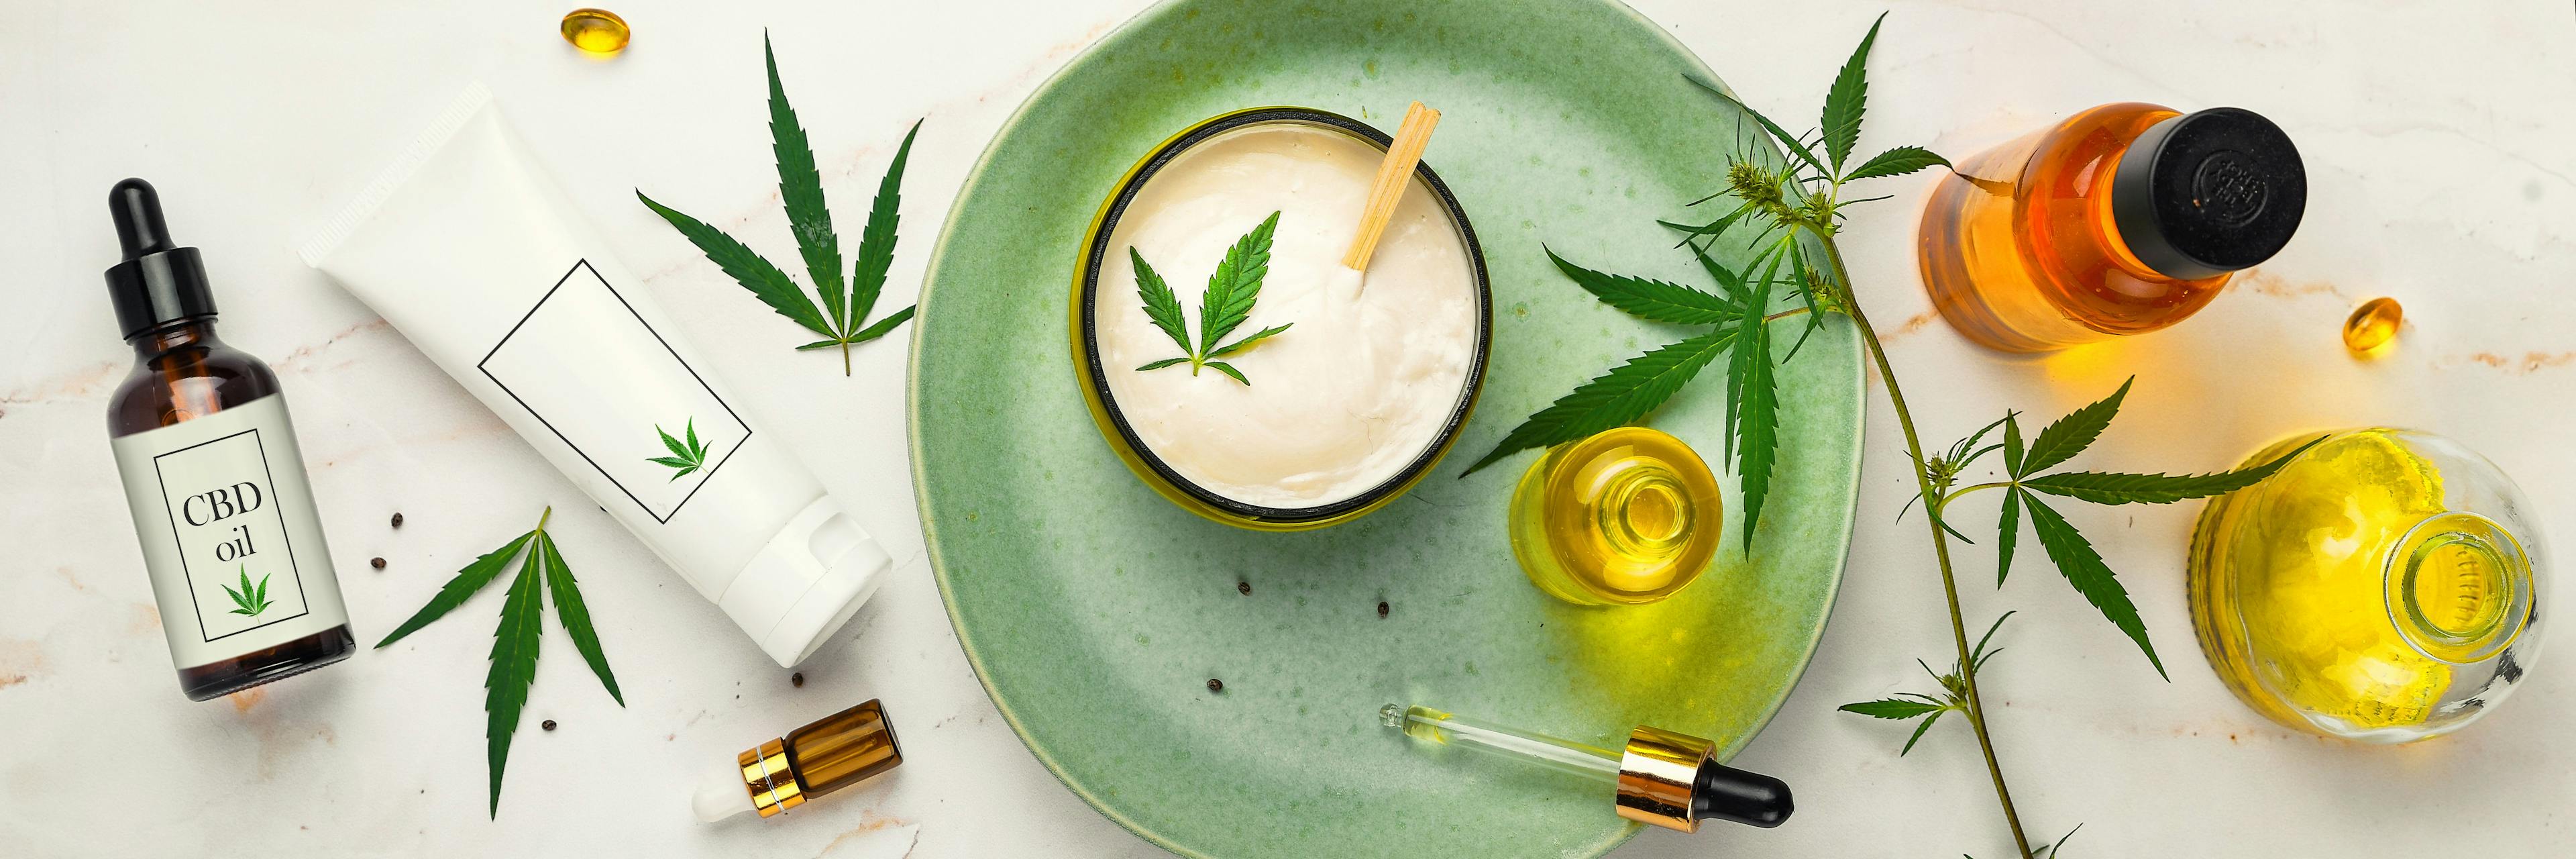 Image of cannabis and CBD products 